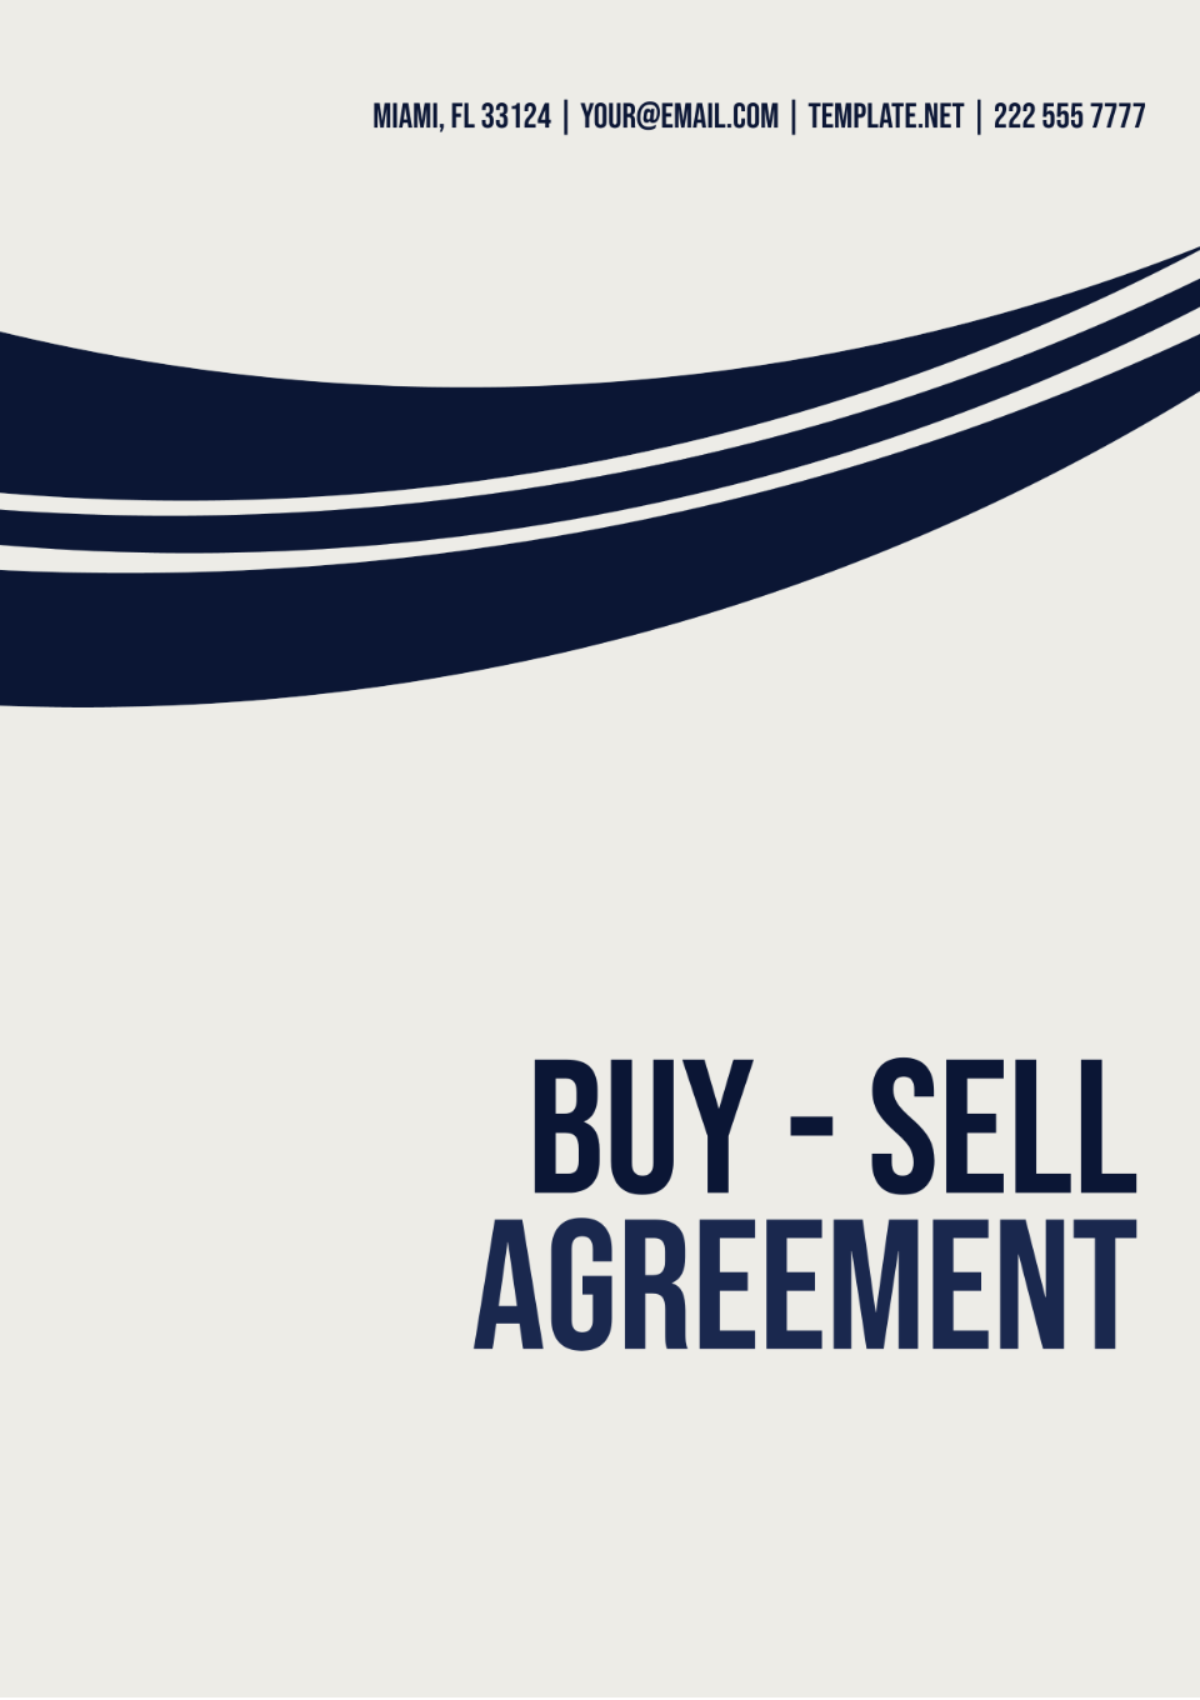 Buy-Sell Agreement Template